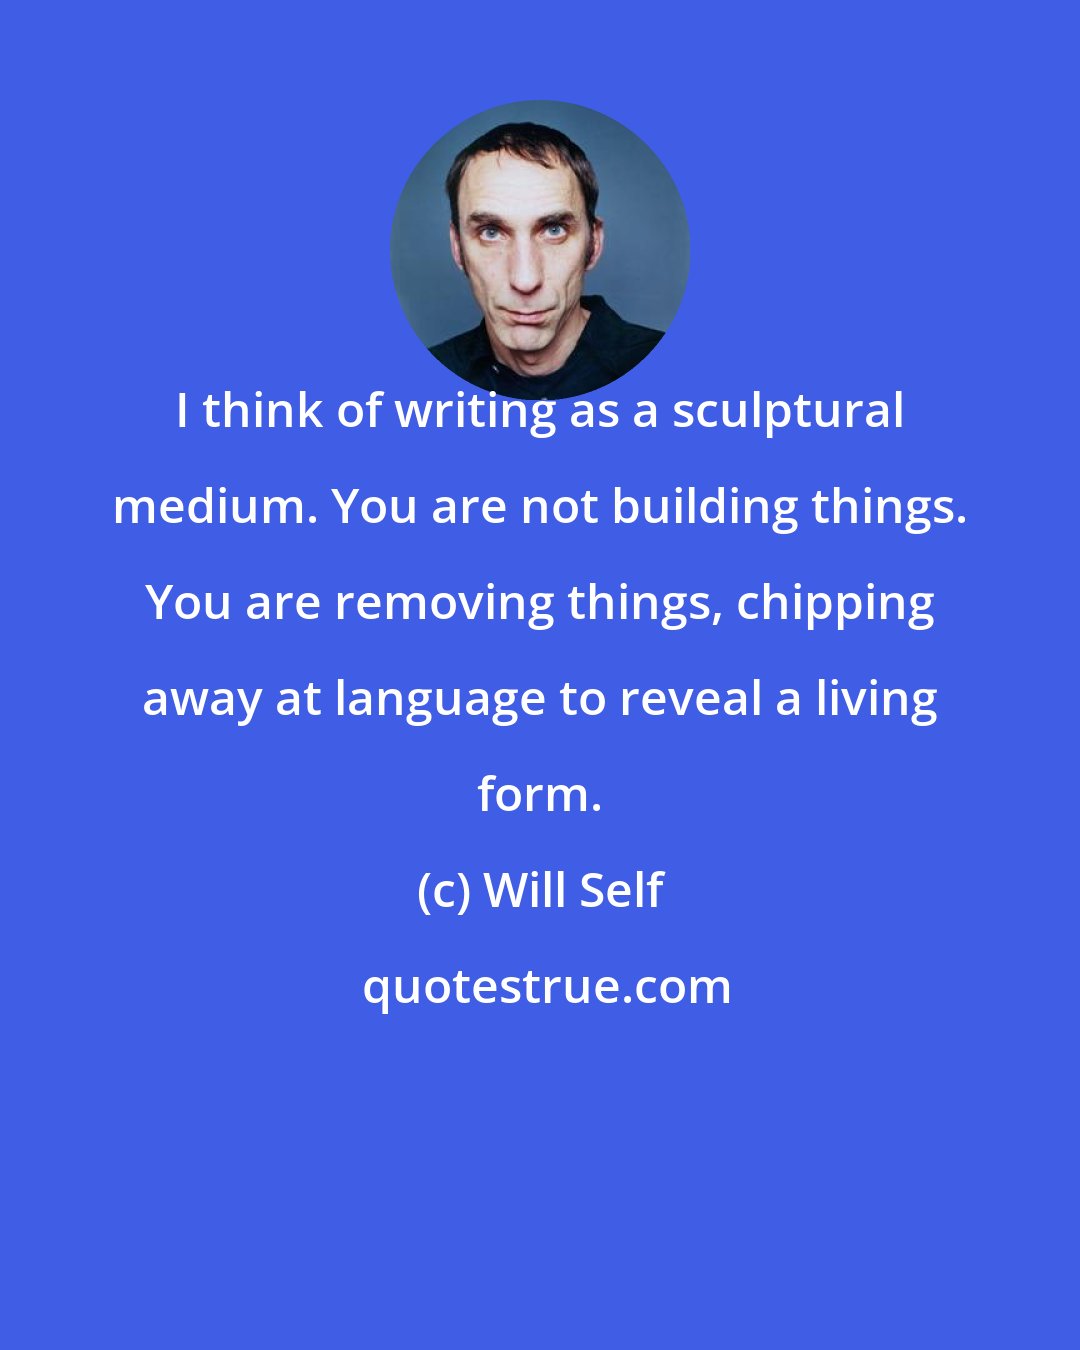 Will Self: I think of writing as a sculptural medium. You are not building things. You are removing things, chipping away at language to reveal a living form.